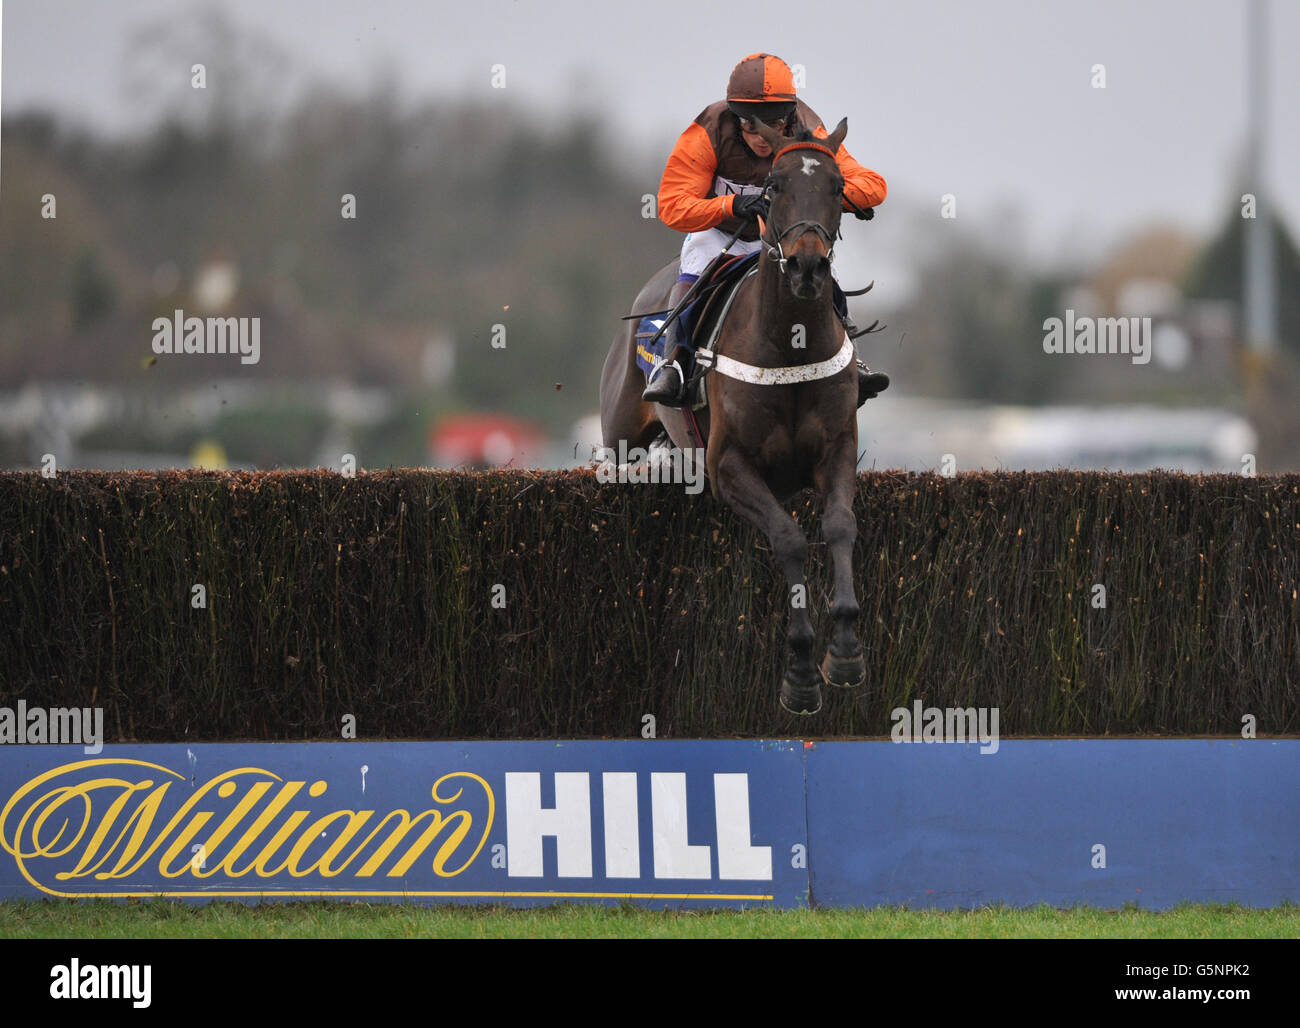 Sam Waley-Cohen on board Rajdhani Express clears the last on the way to winning the second race, the William Hill - Download The App Novices' Handicap Chase Stock Photo